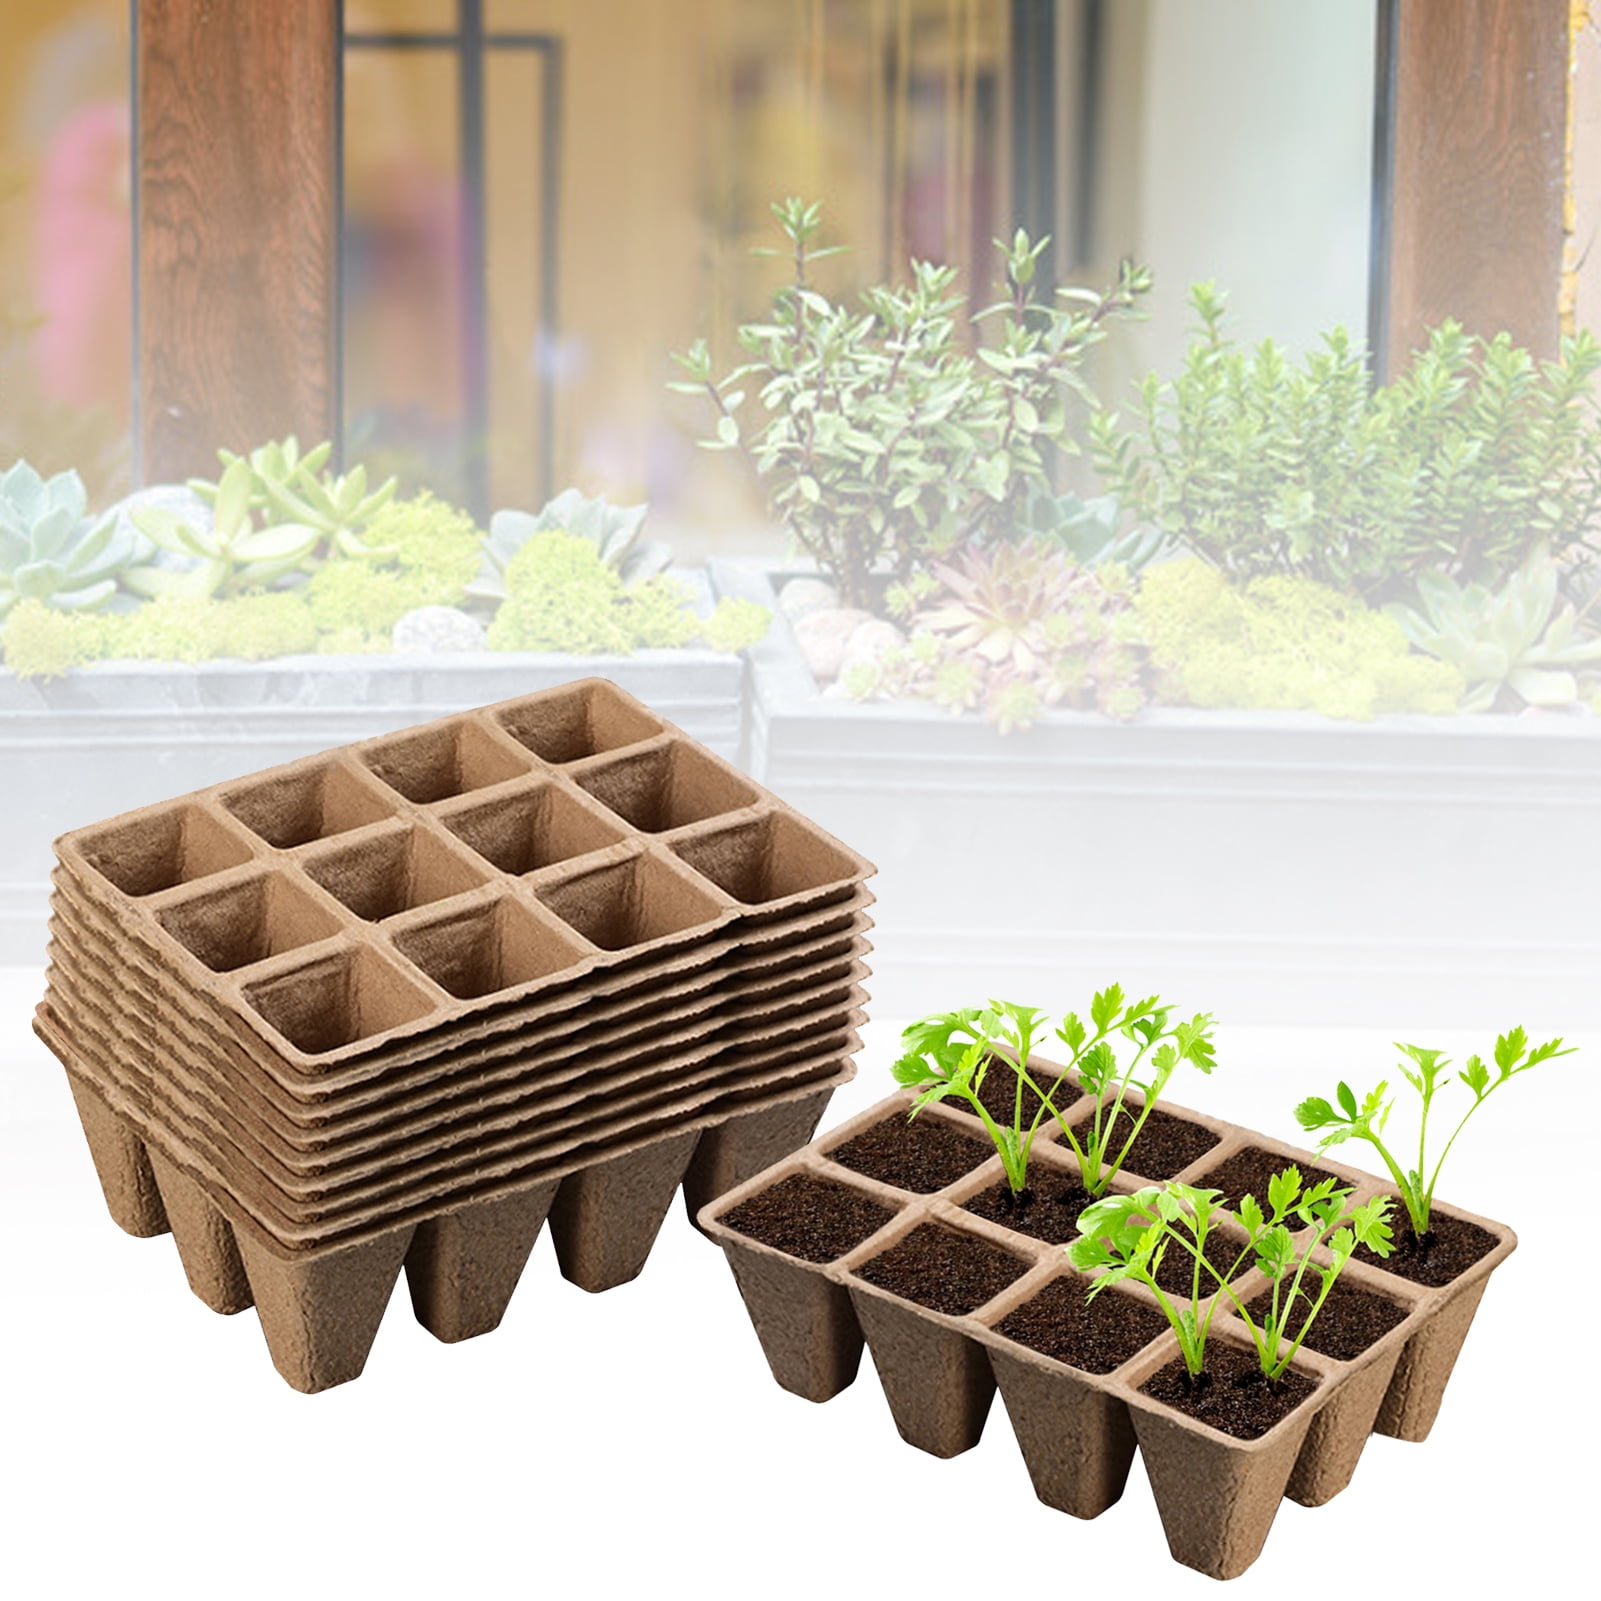 Details about   6.5 gal Tall Flower Planter Clay with Self-Watering Tray in 4 Colors